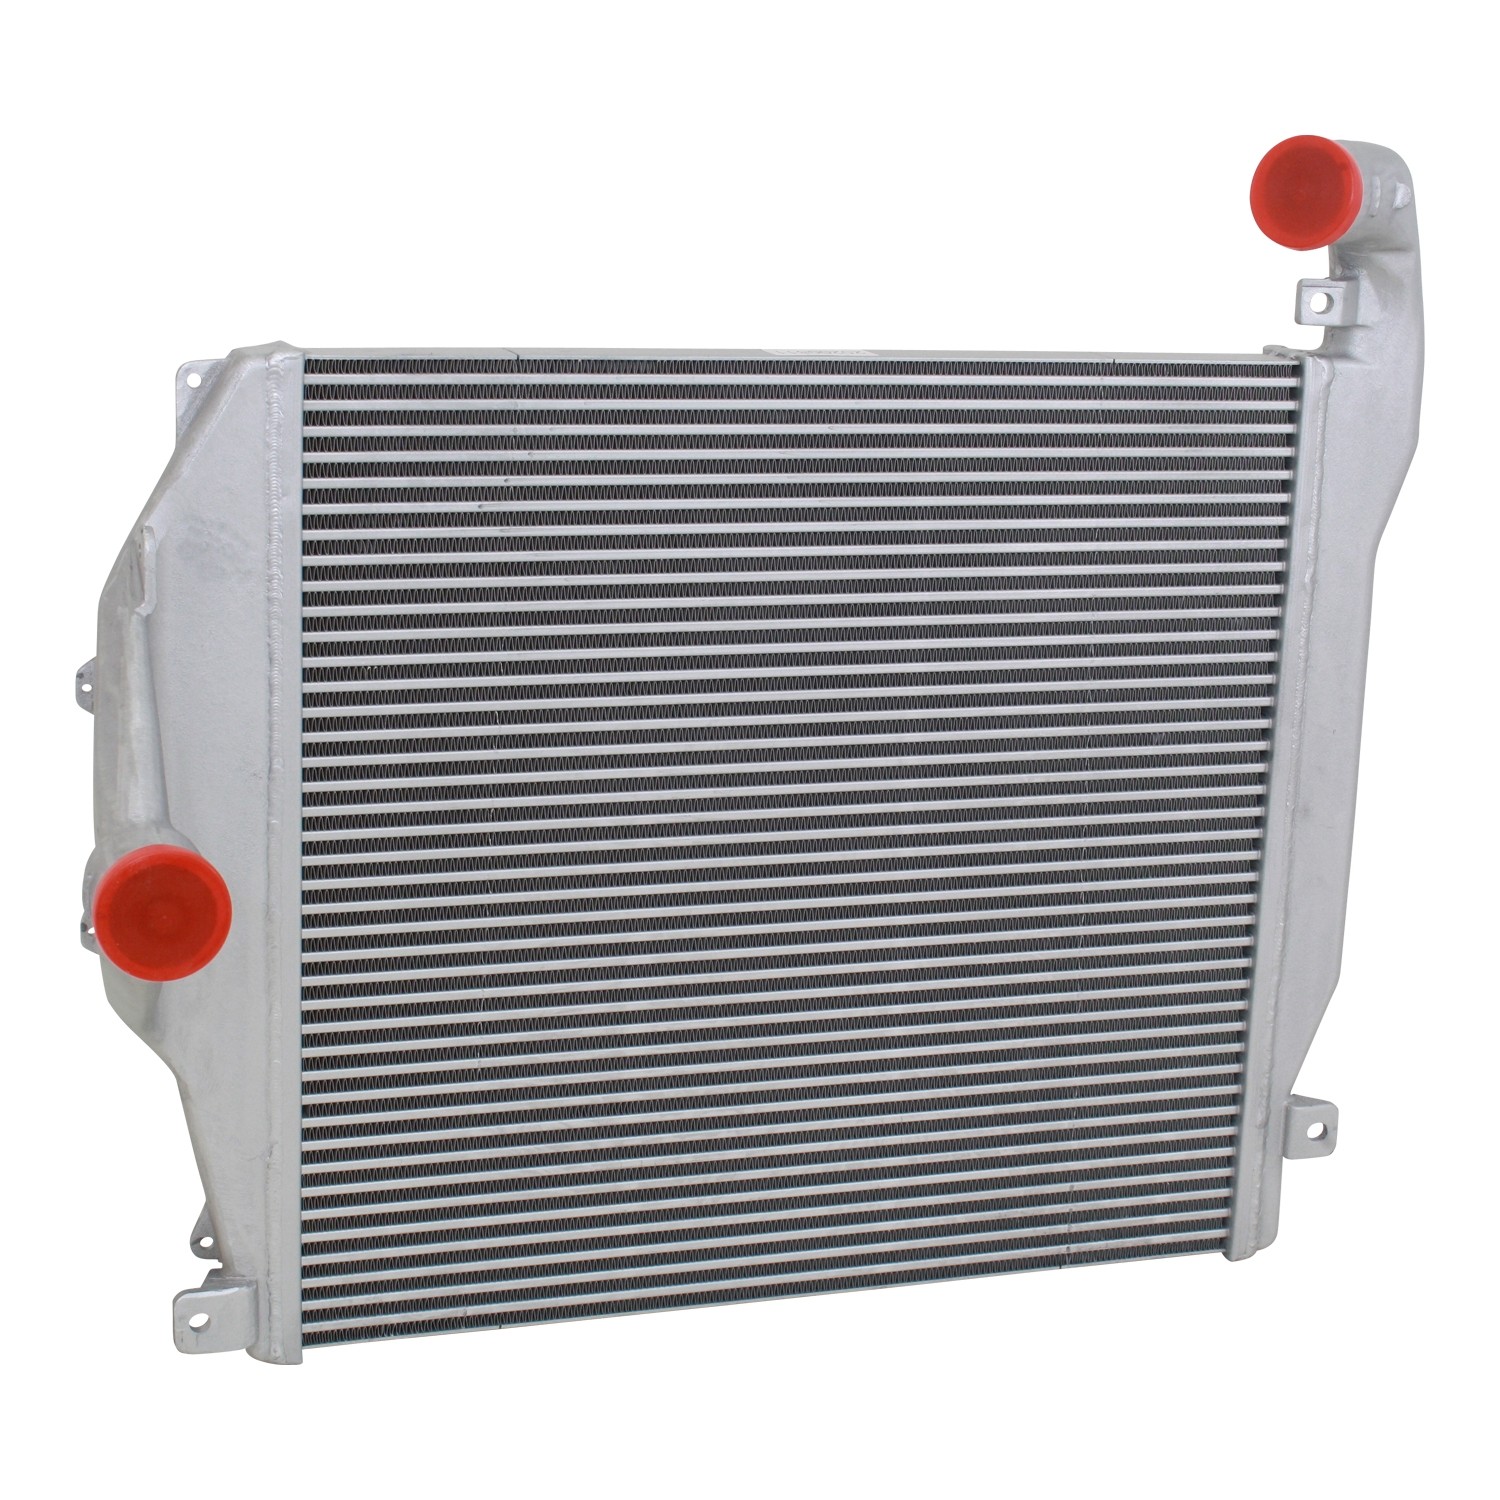 International Charge Air Cooler 2008 And Newer Workstar.